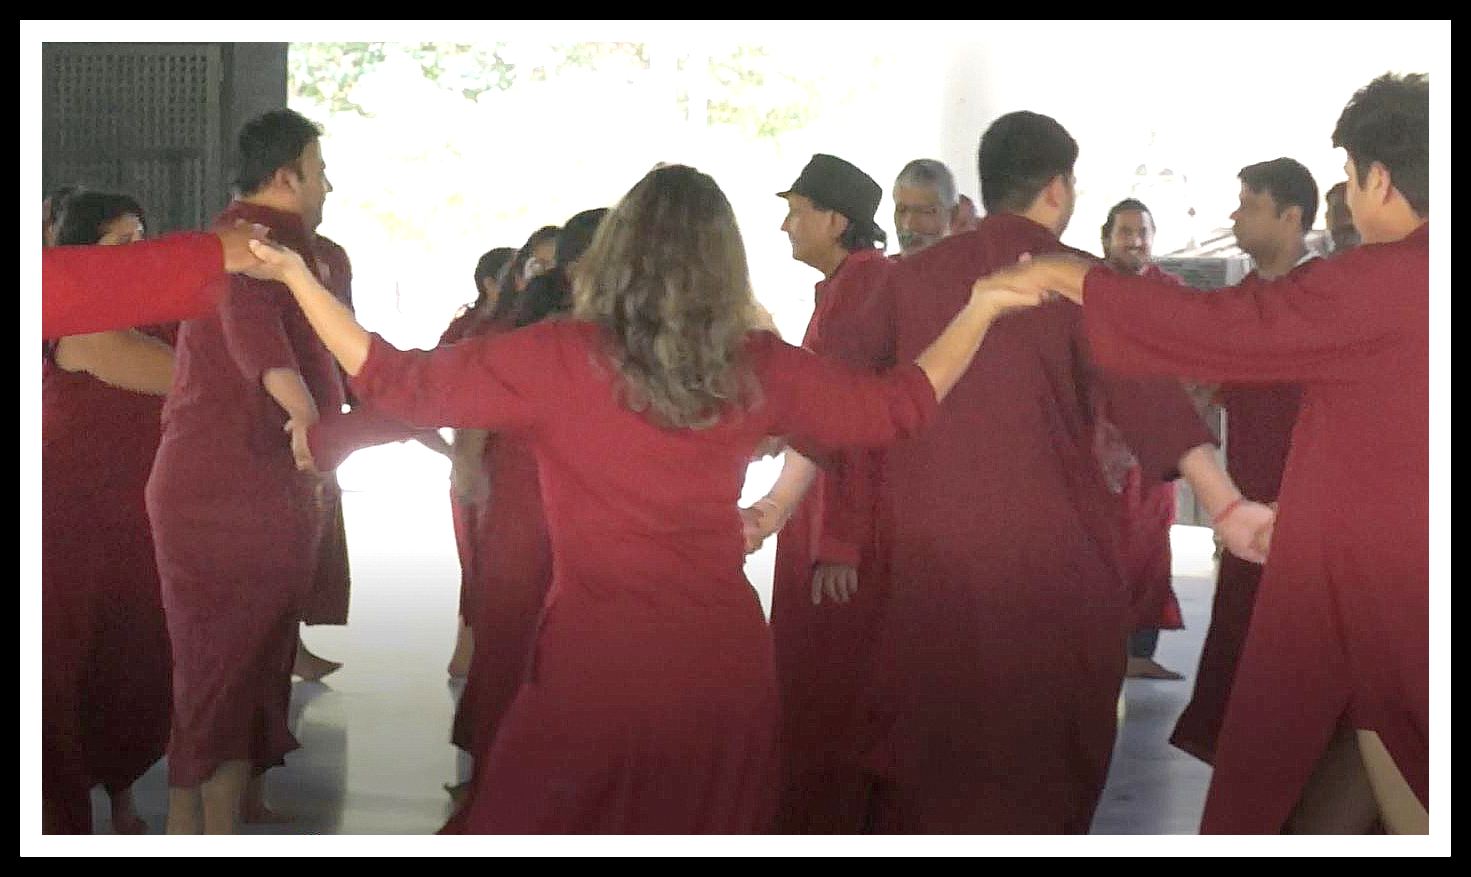 ‘Let Us Rejoice’ - Jewish Folk Song and Dance, Hava Nagila, Introduced to Osho Lovers in New Delhi